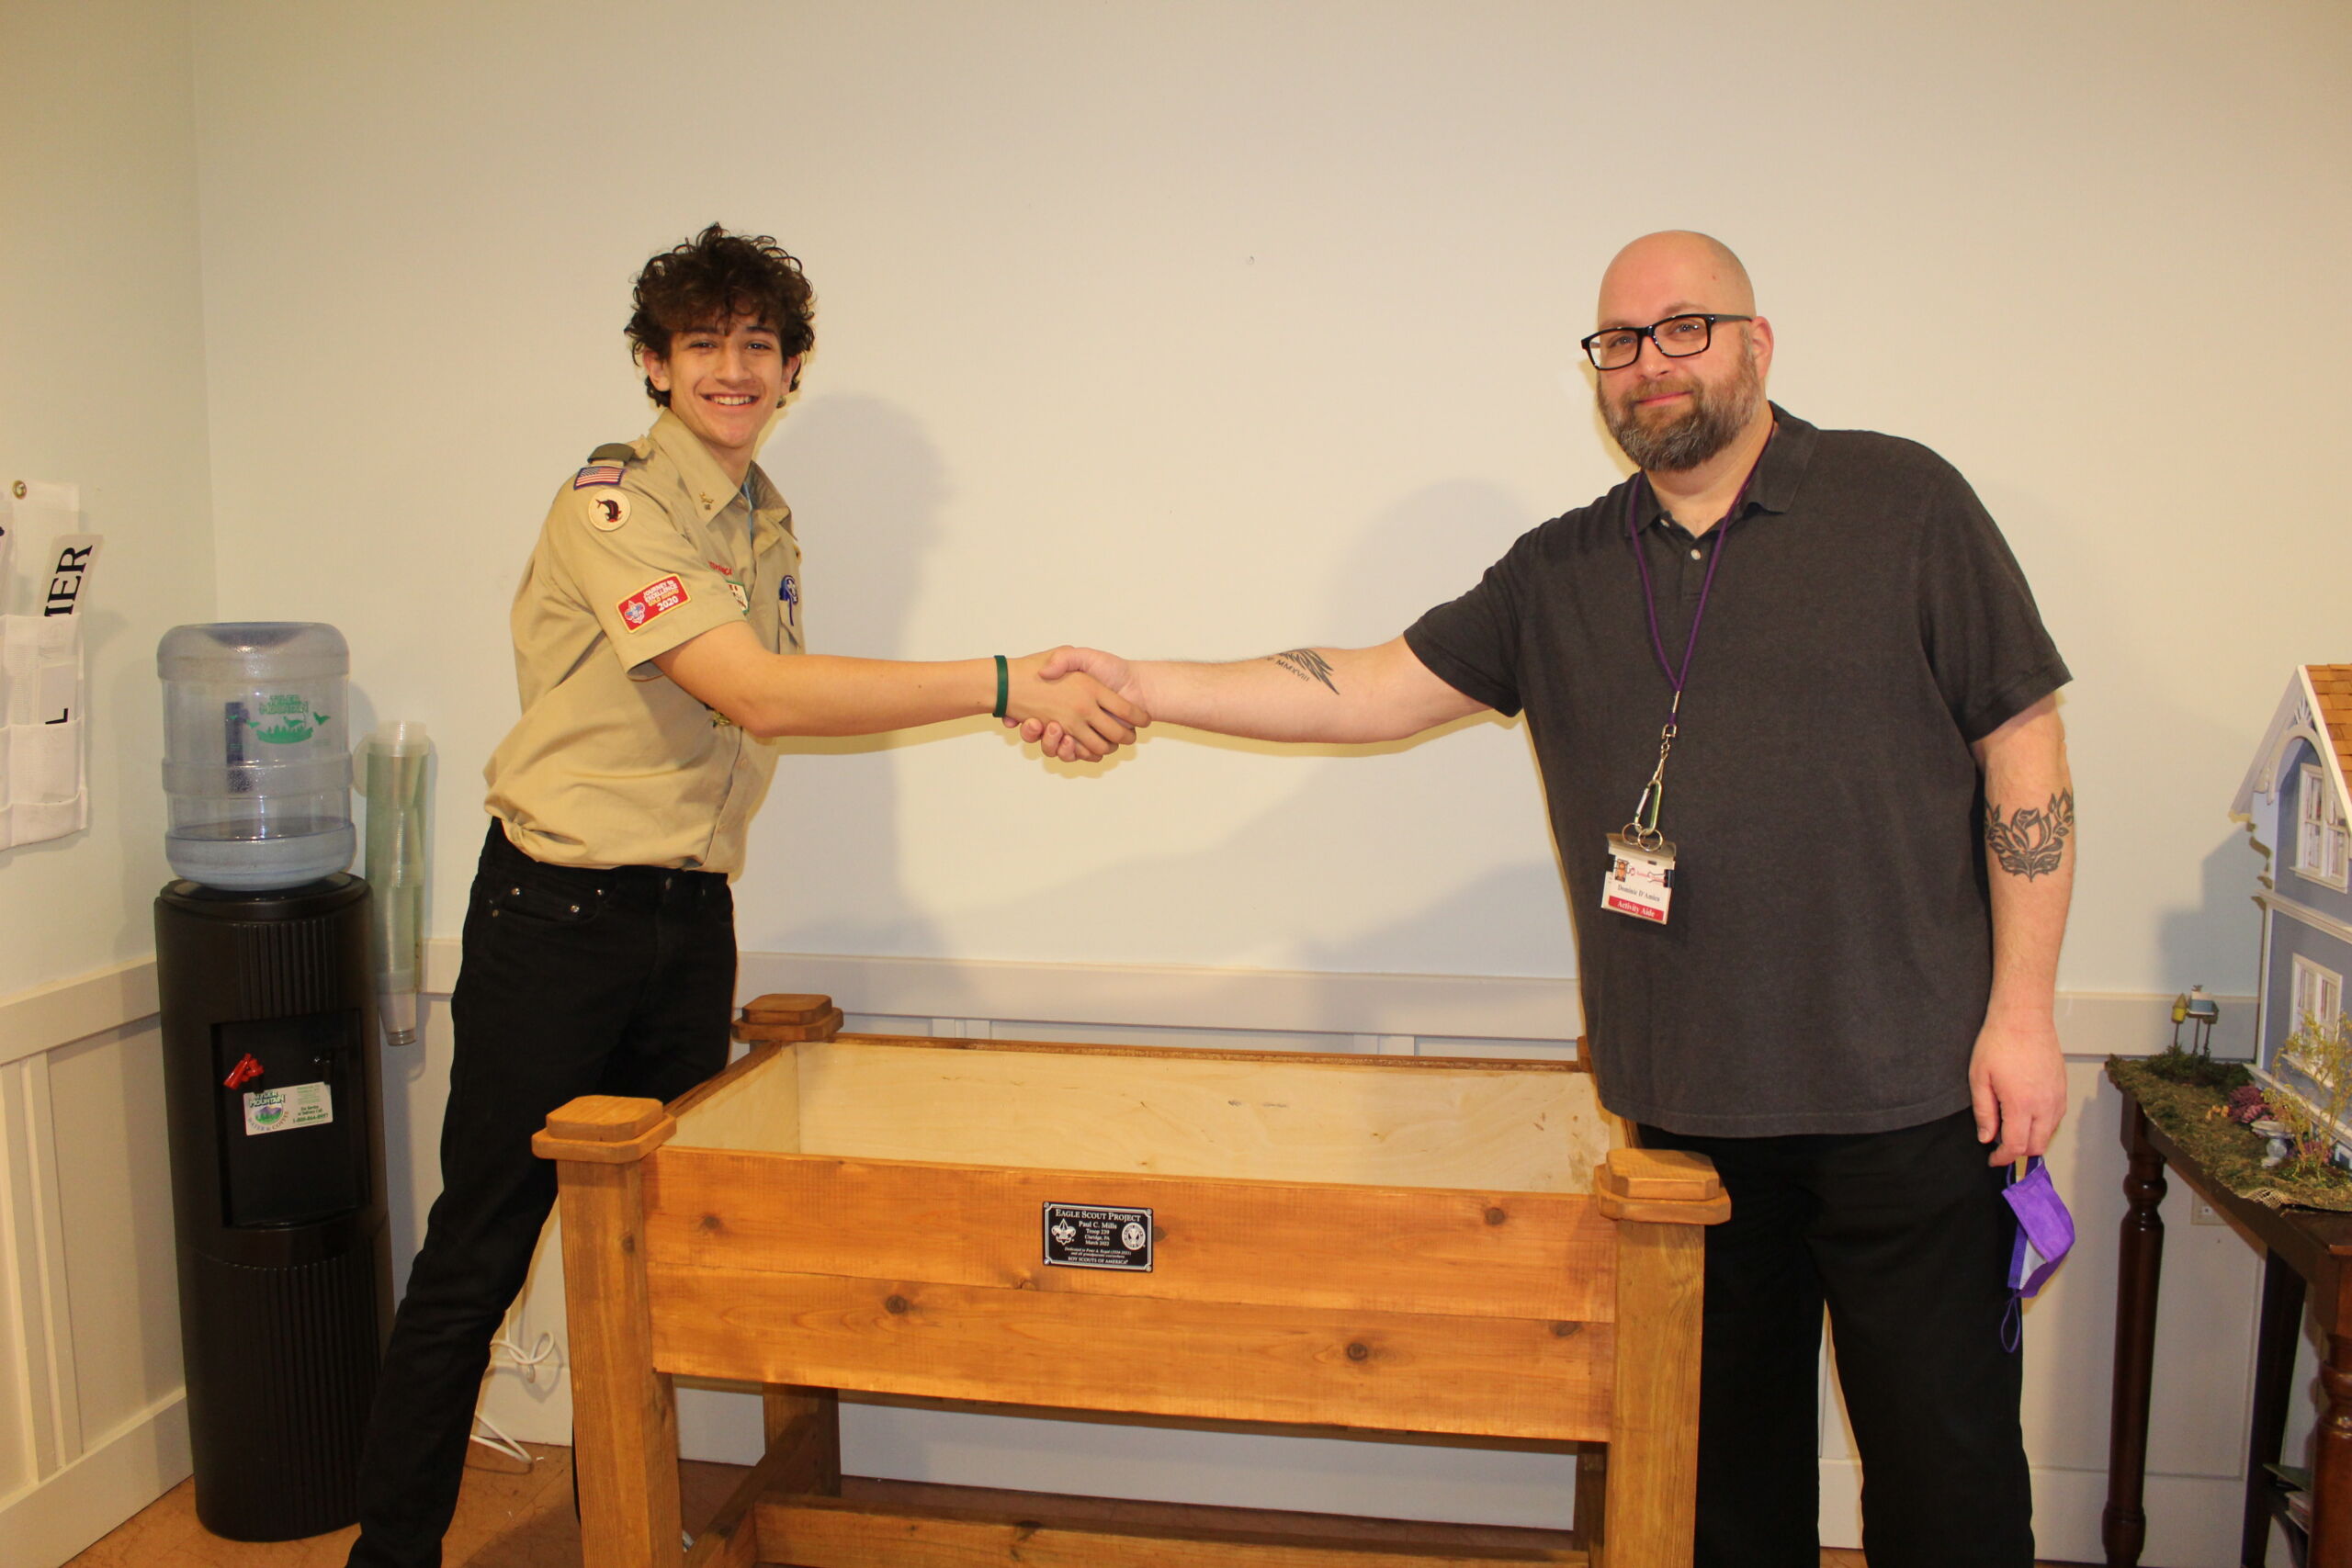 Redstone team member posing with an Eagle Scout and their completed project